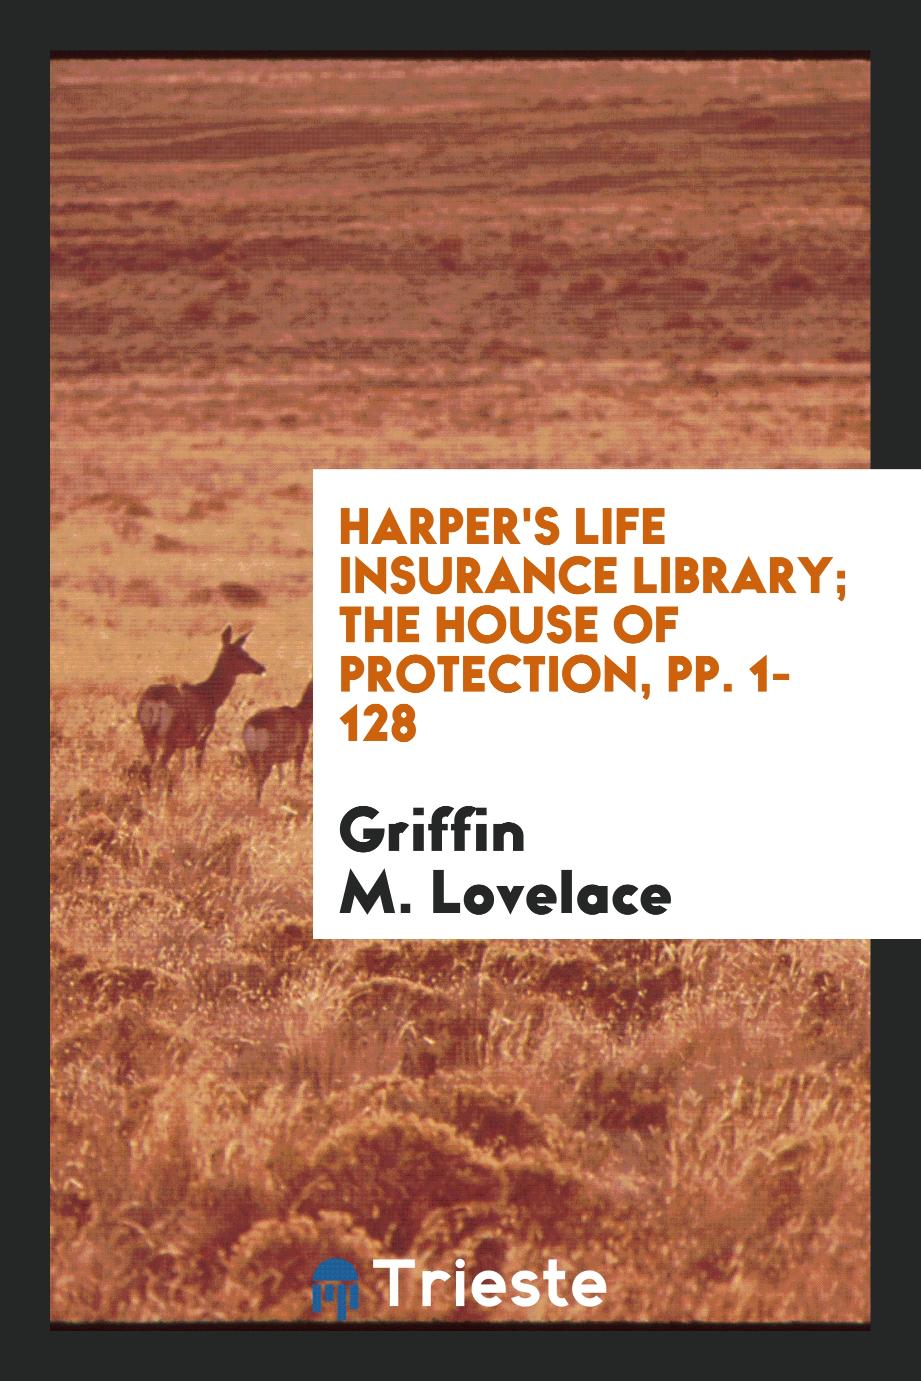 Harper's Life Insurance Library; The House of Protection, pp. 1-128